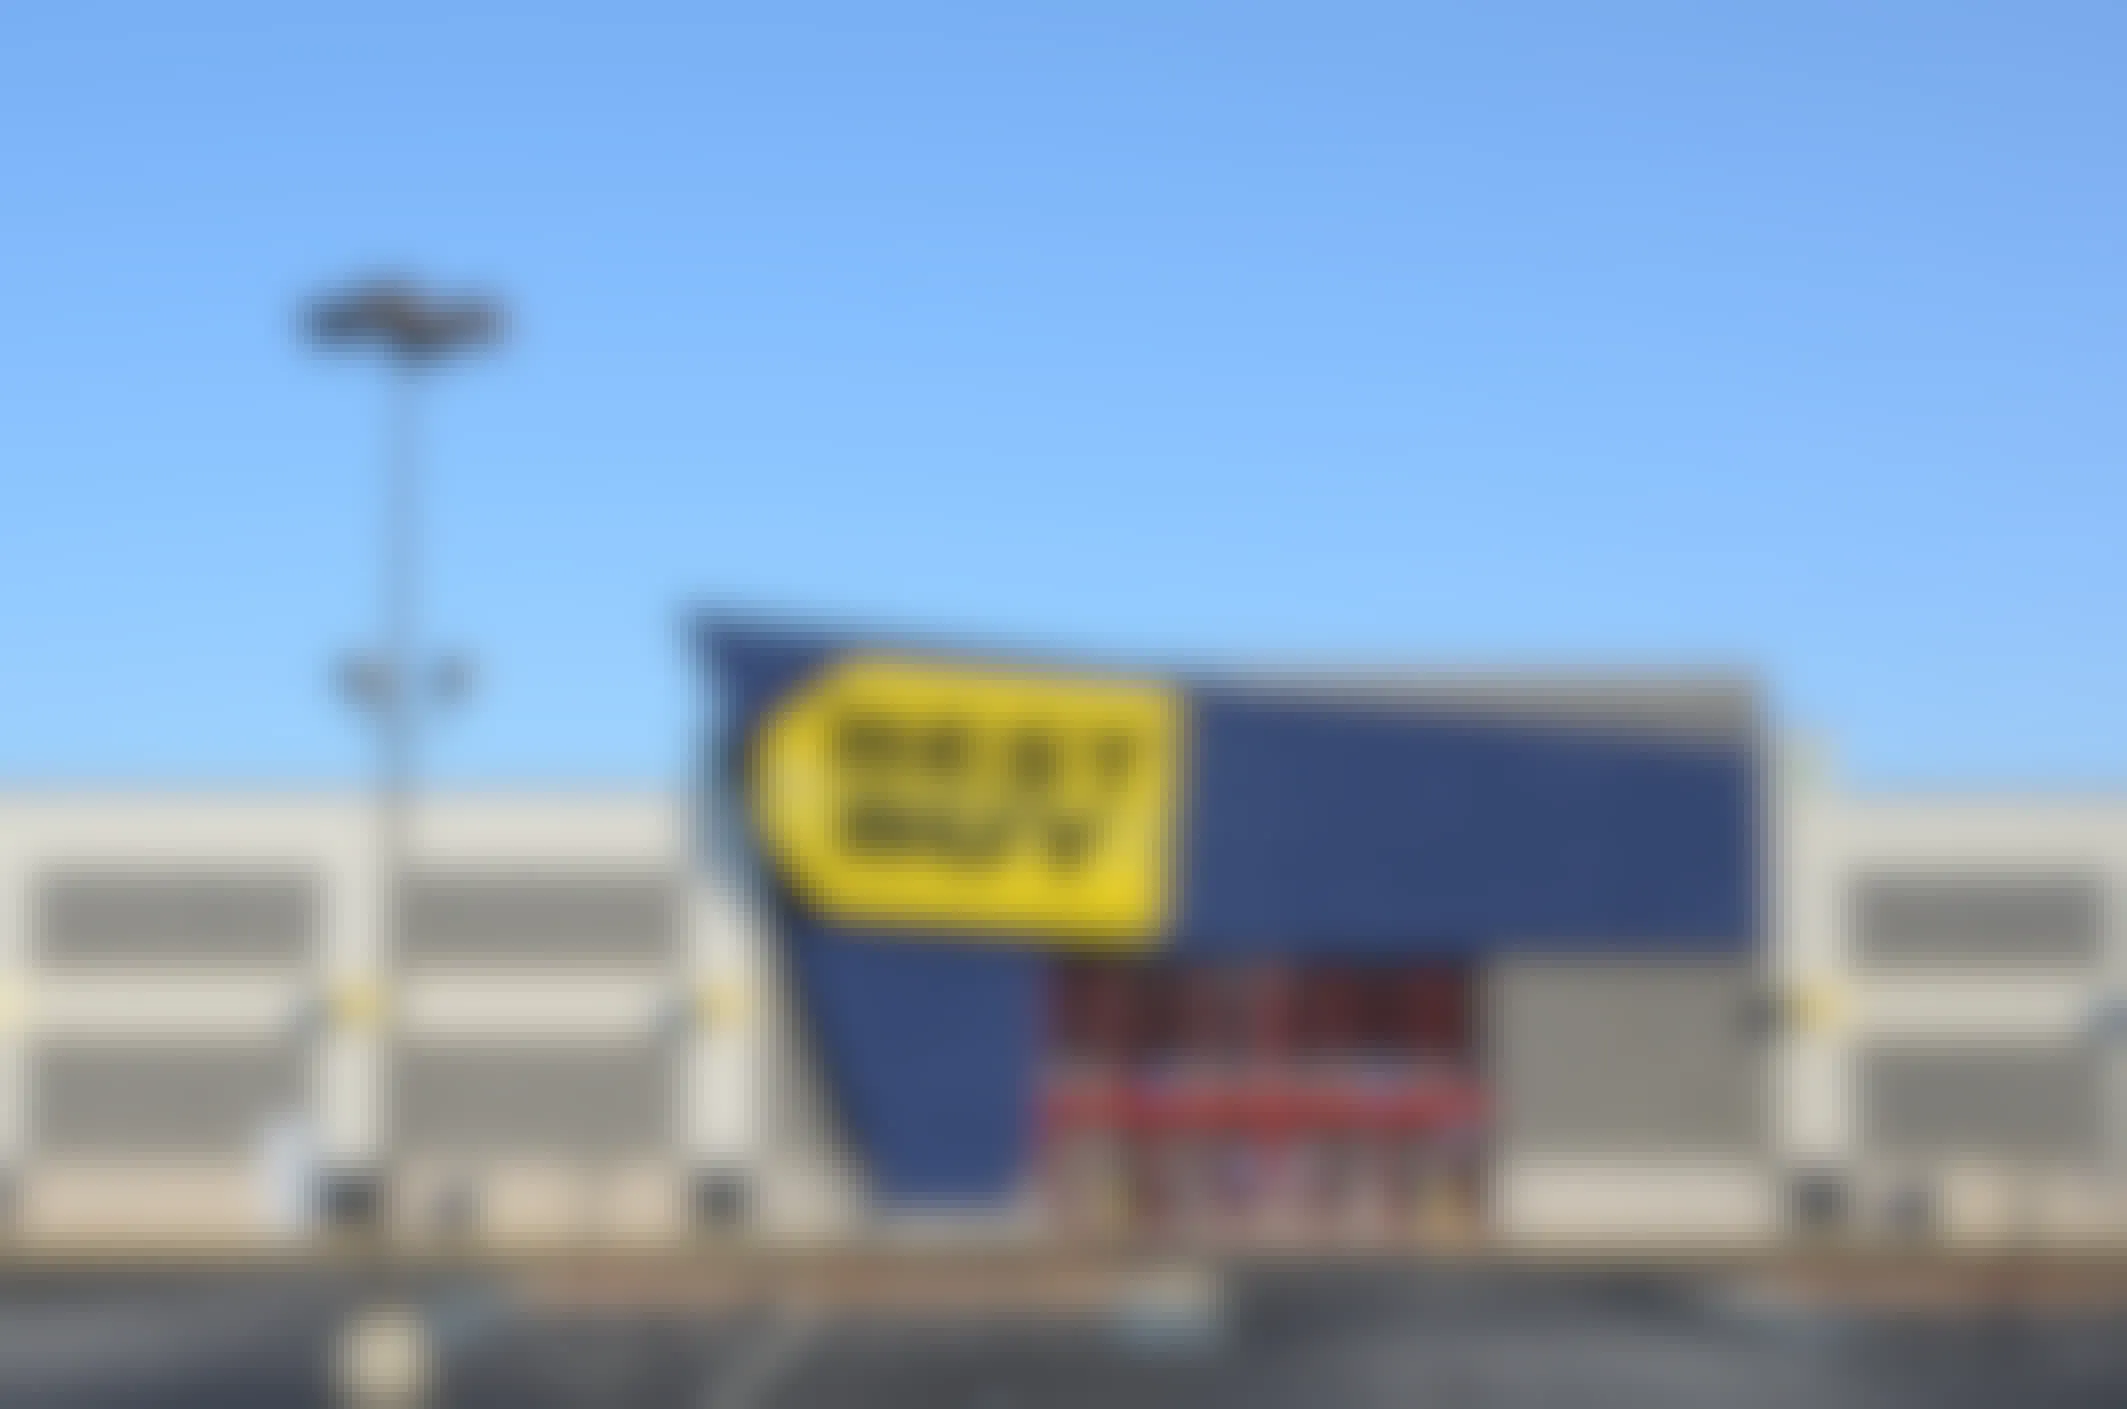 Exterior of a Best Buy store 2020